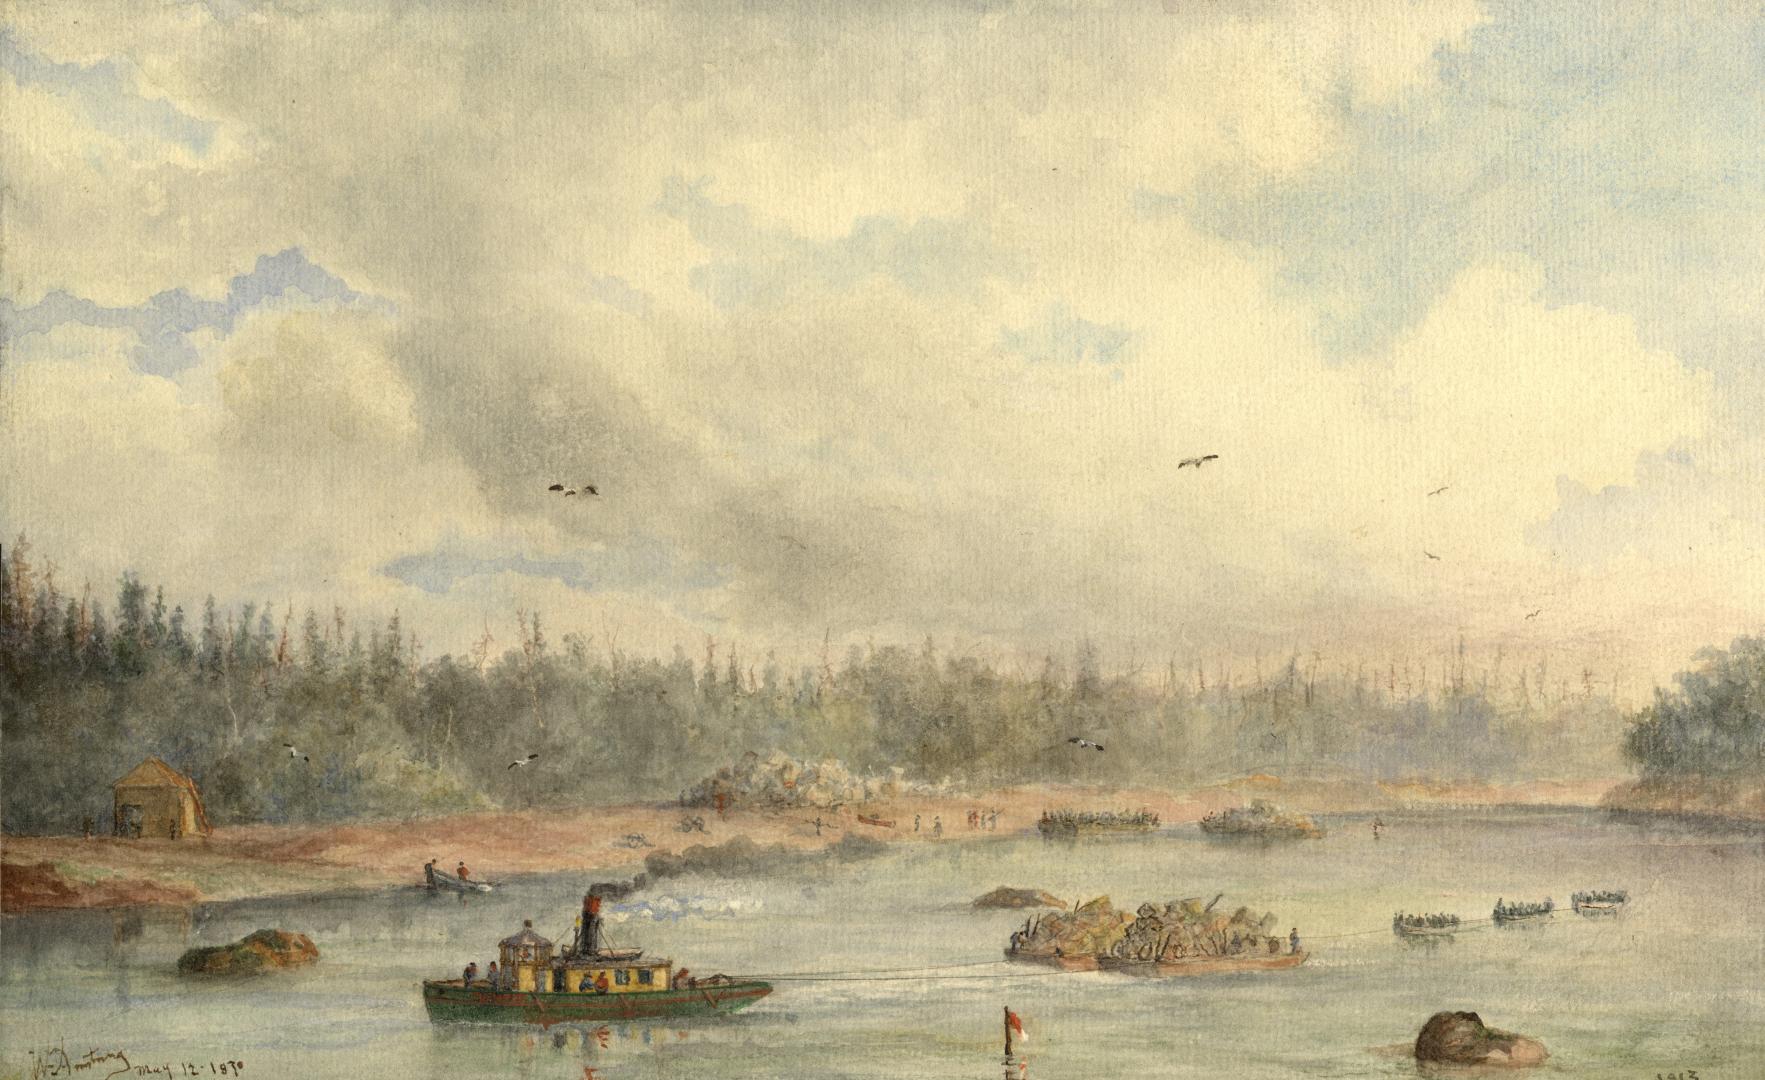 A painting of a very rural waterway, with a steamer in foreground, in approximately 1869.